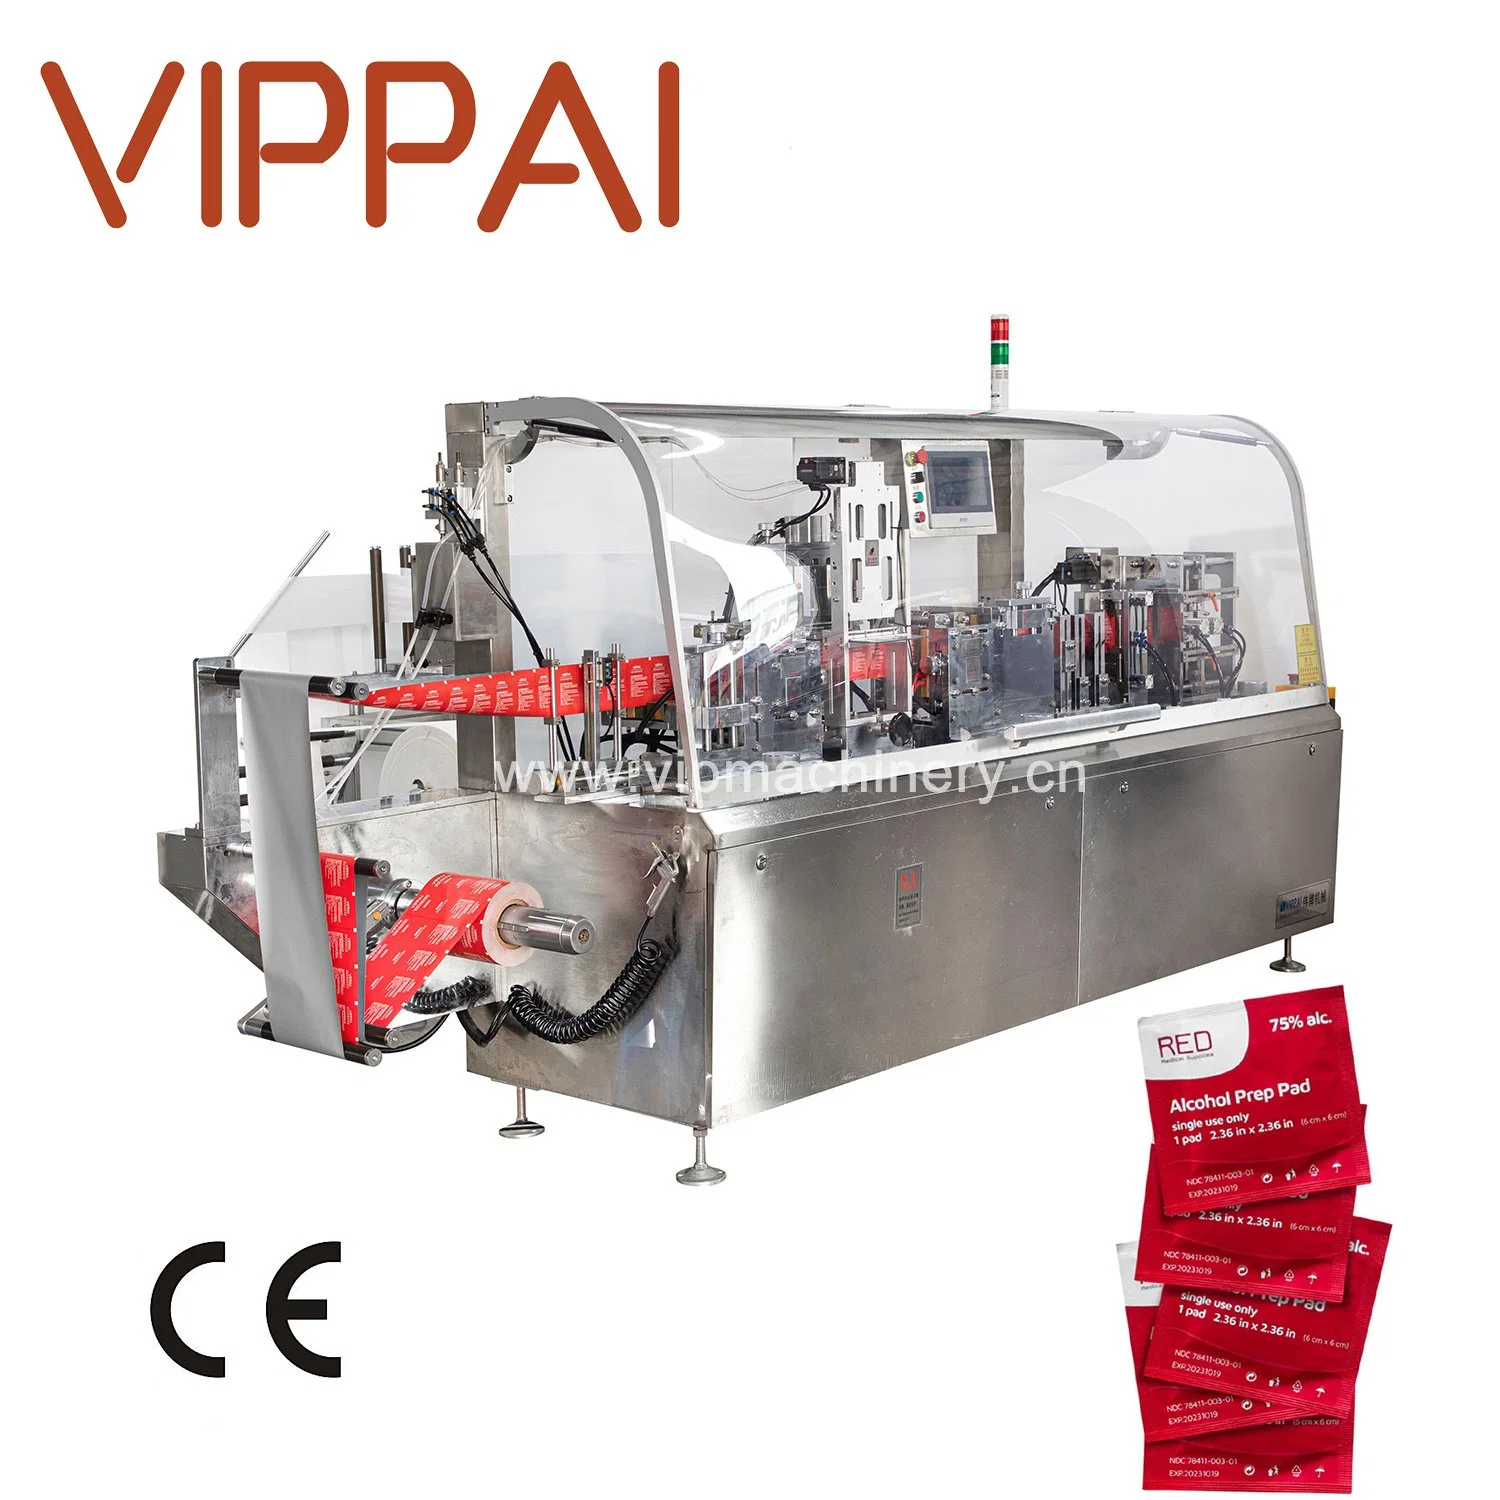 Vippai Multi-Function Wet Wipes Tissue Production Line Making Packaging Machine for Medical Daily Use